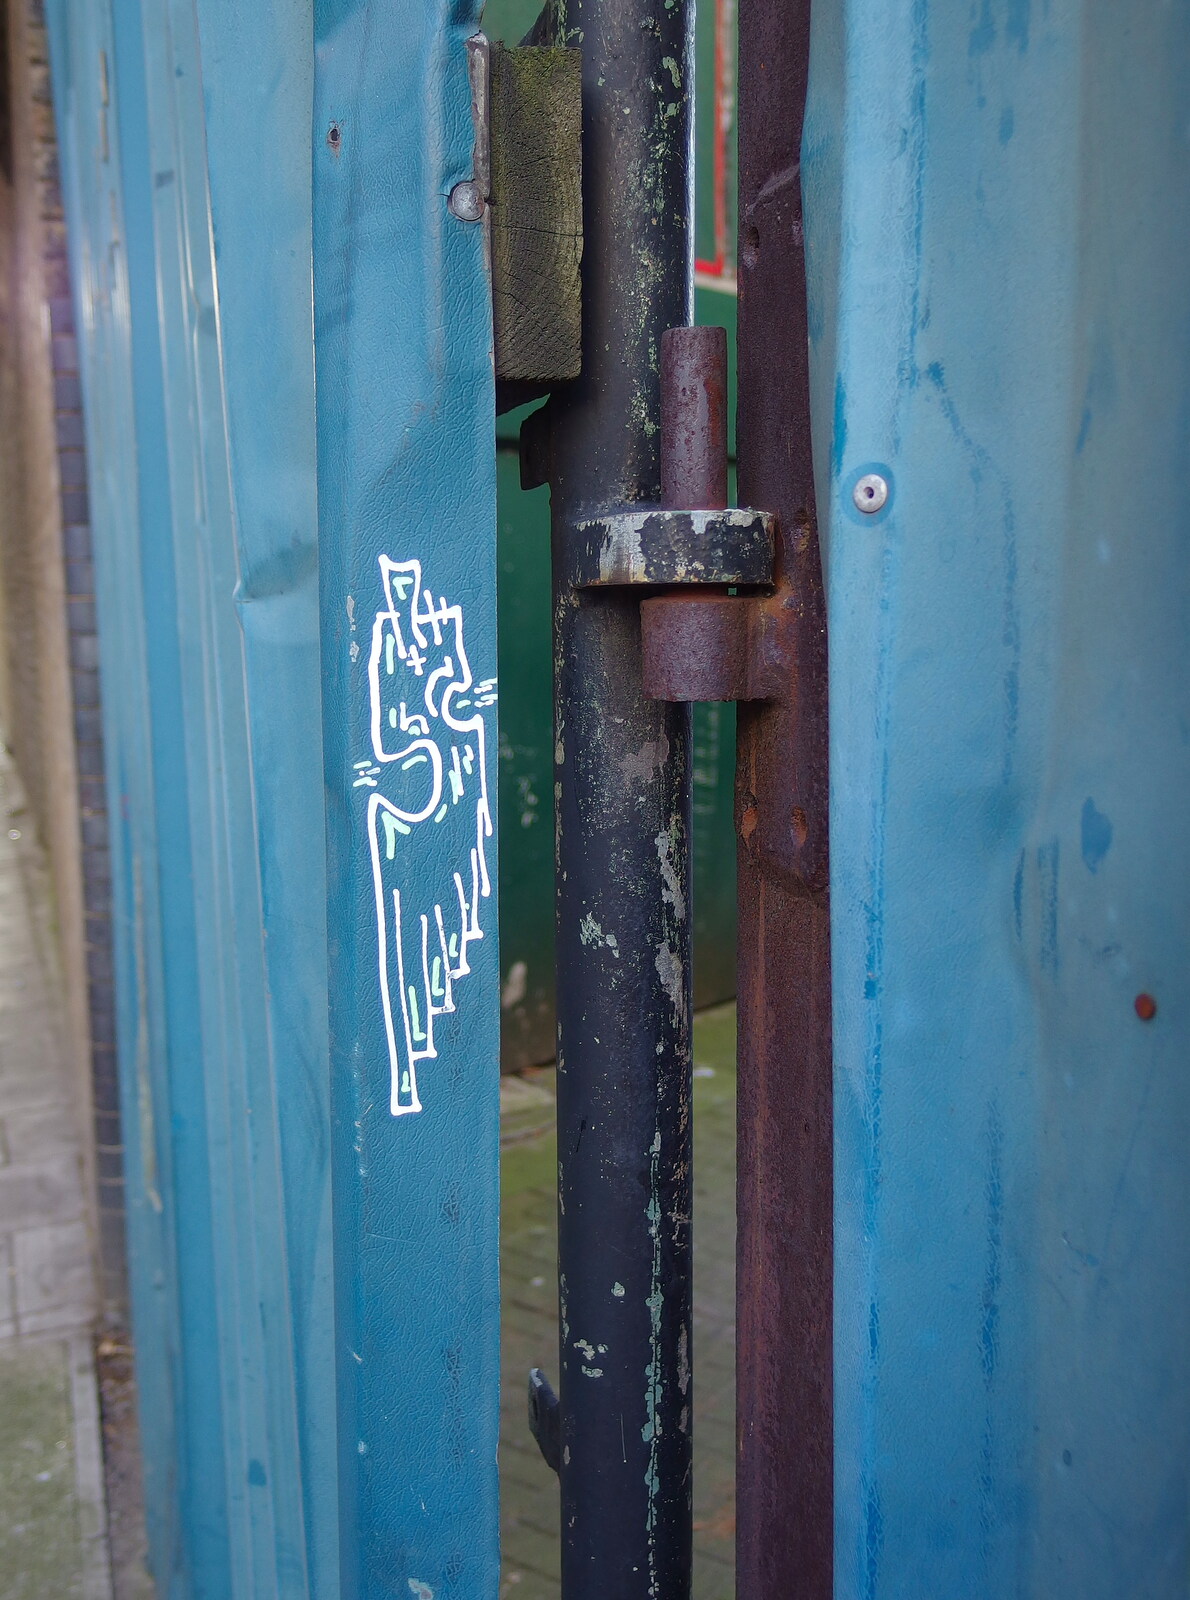 SwiftKey's Arcade Cabinet, and the Streets of Southwark, London - 5th December 2013: A little graffiti detail on a gate